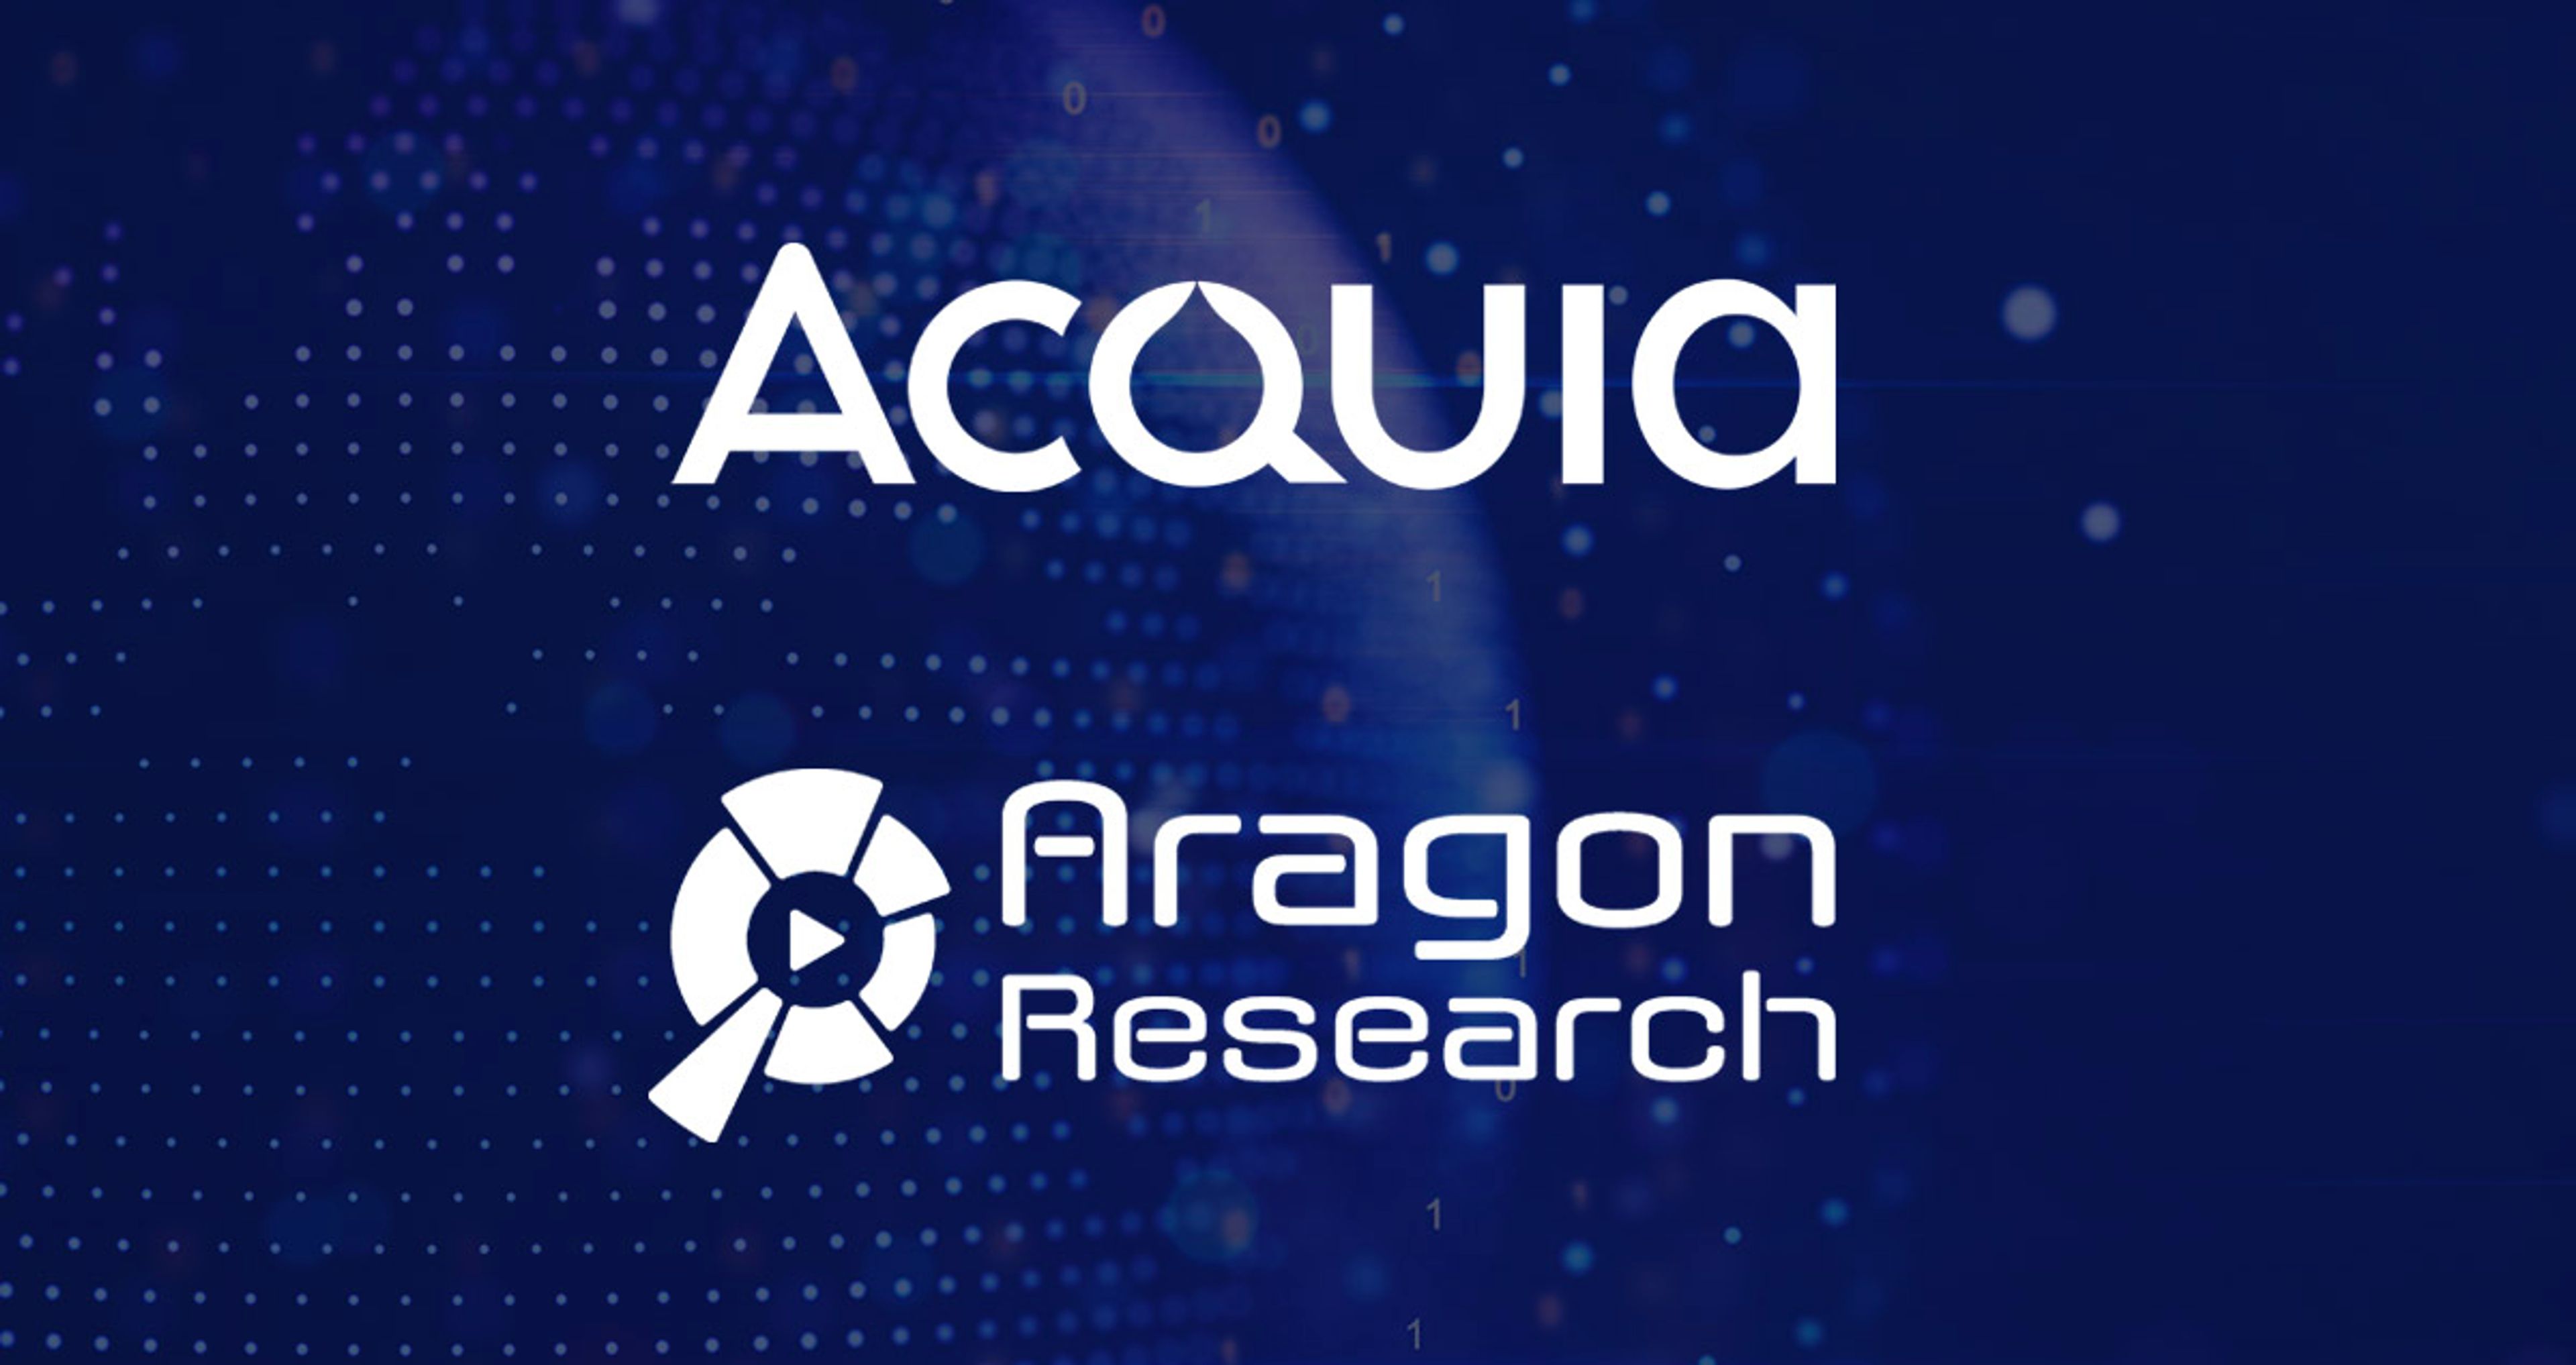 Acquia and Aragon Research logos